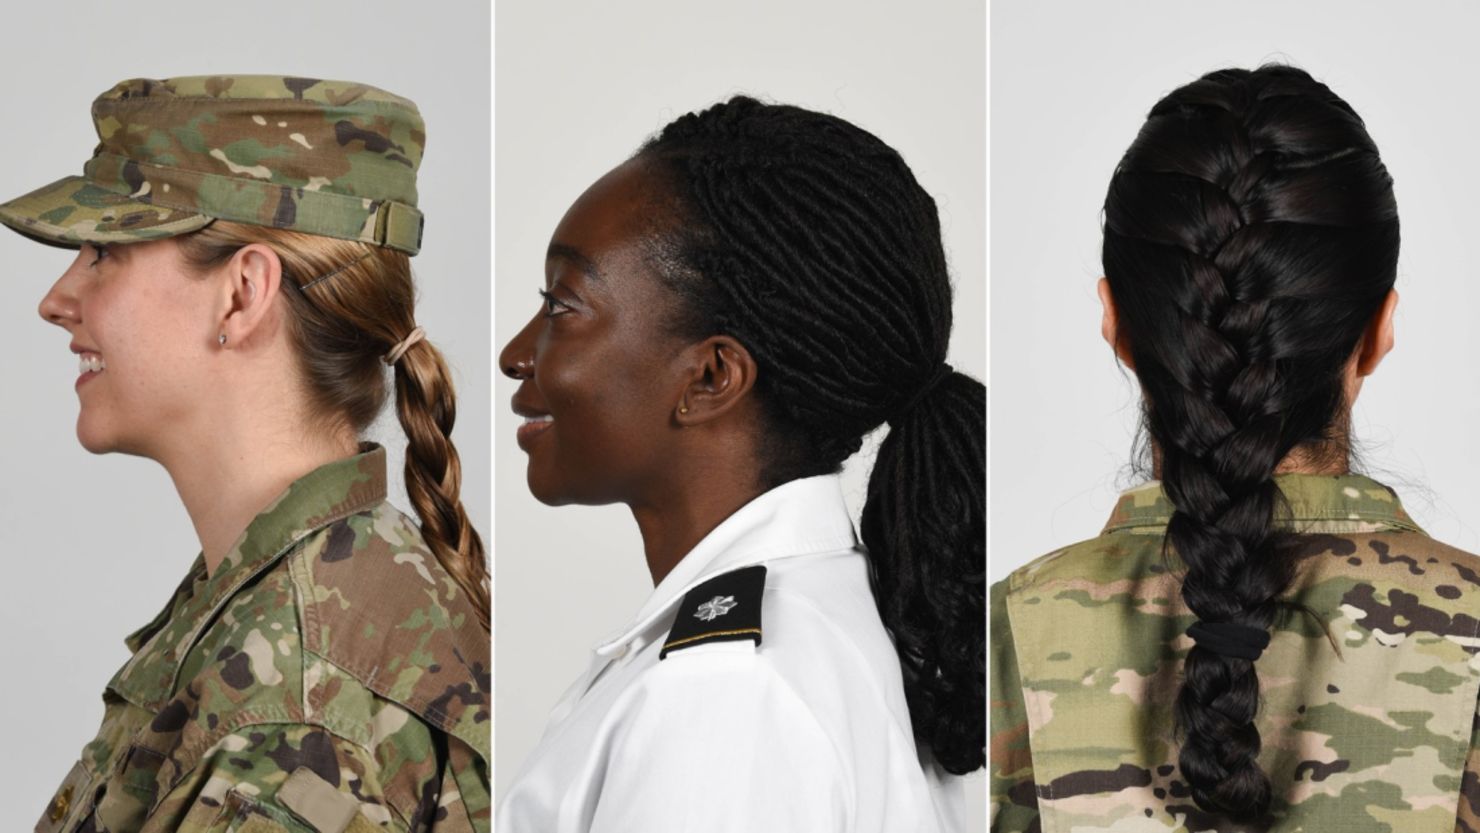 US soldiers wearing new approved ponytail styles.